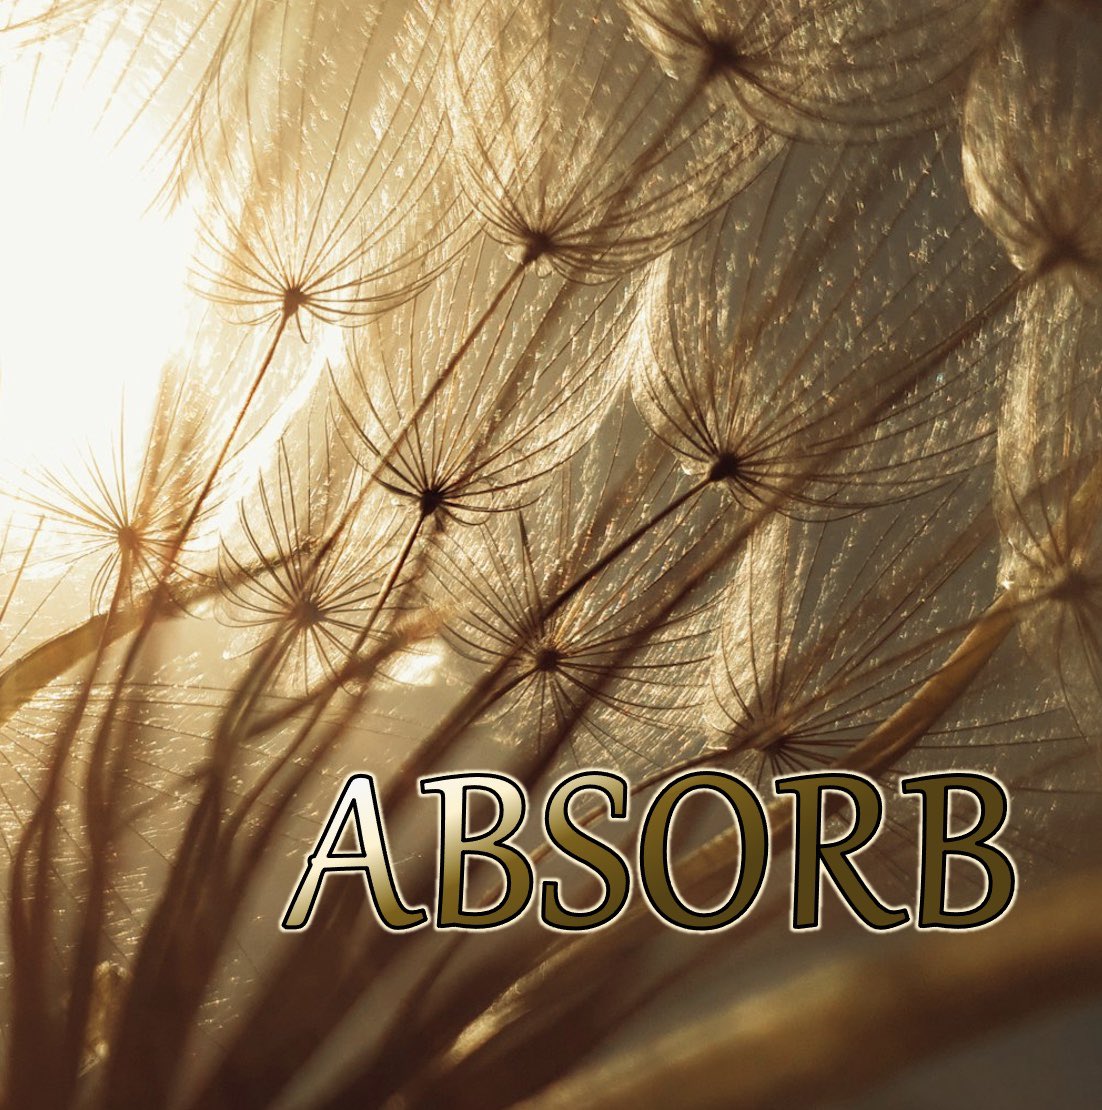 #SymphAndJules word of the day: Absorb

Don't forget to @ us in your posts, and we'll re-tweet! 💛📷

#WritingPrompts